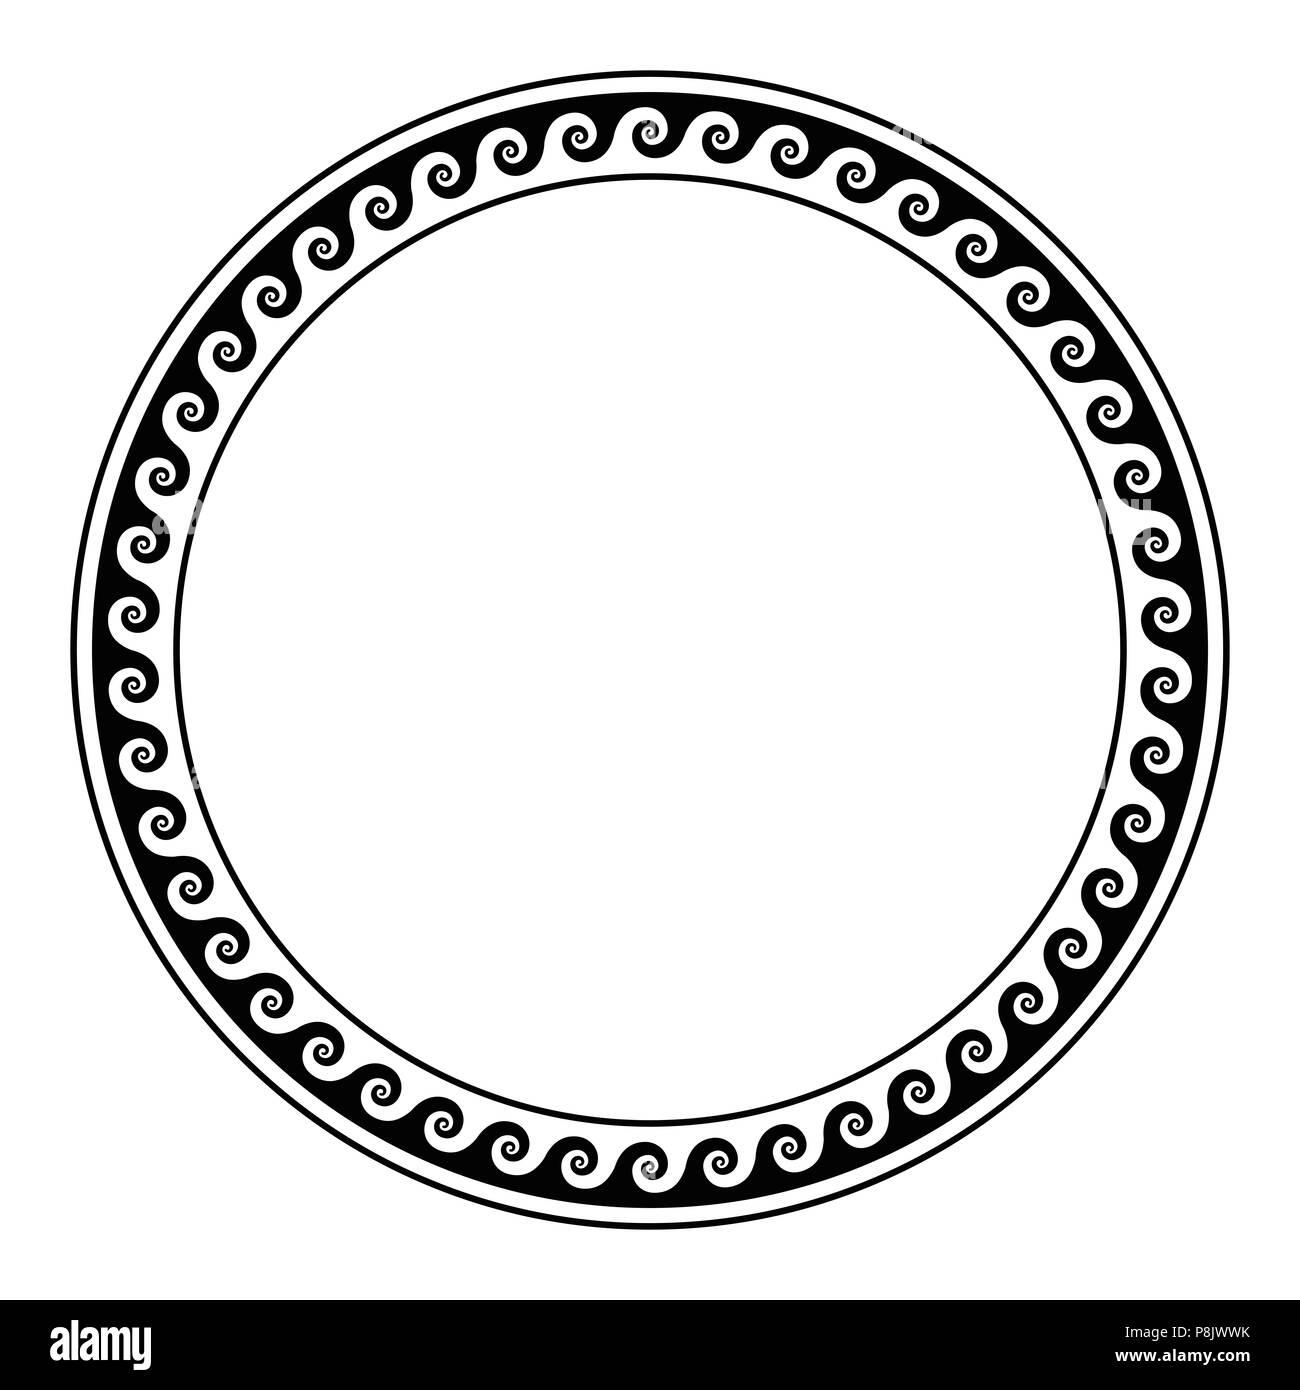 Circle frame, made with running dog pattern. Seamless meander design over white. Waves shaped into repeated motif. Scroll pattern. Stock Photo